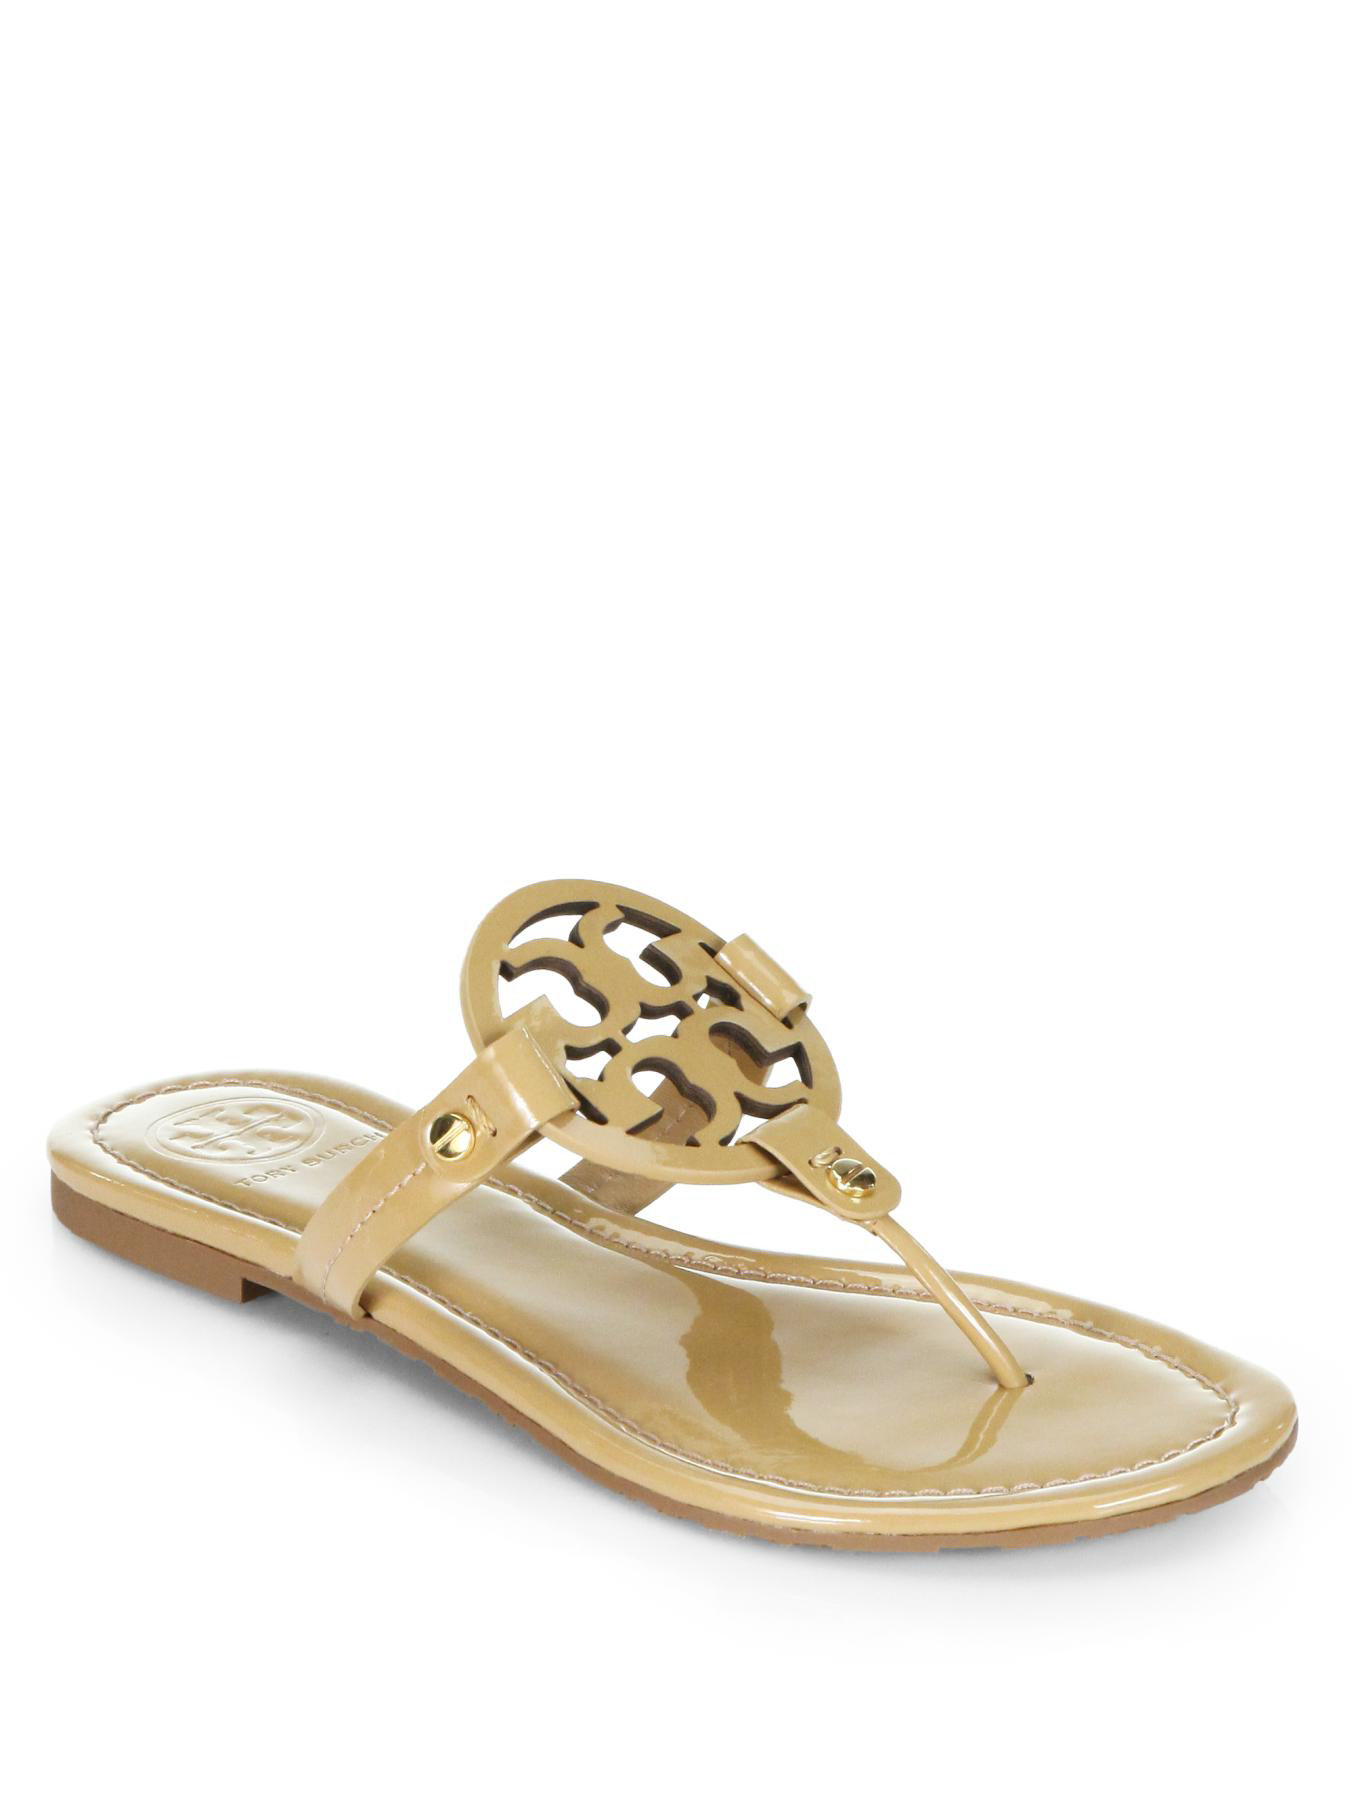 Tory burch Miller Patent Leather Logo Thong Sandals in Gold (sand) | Lyst